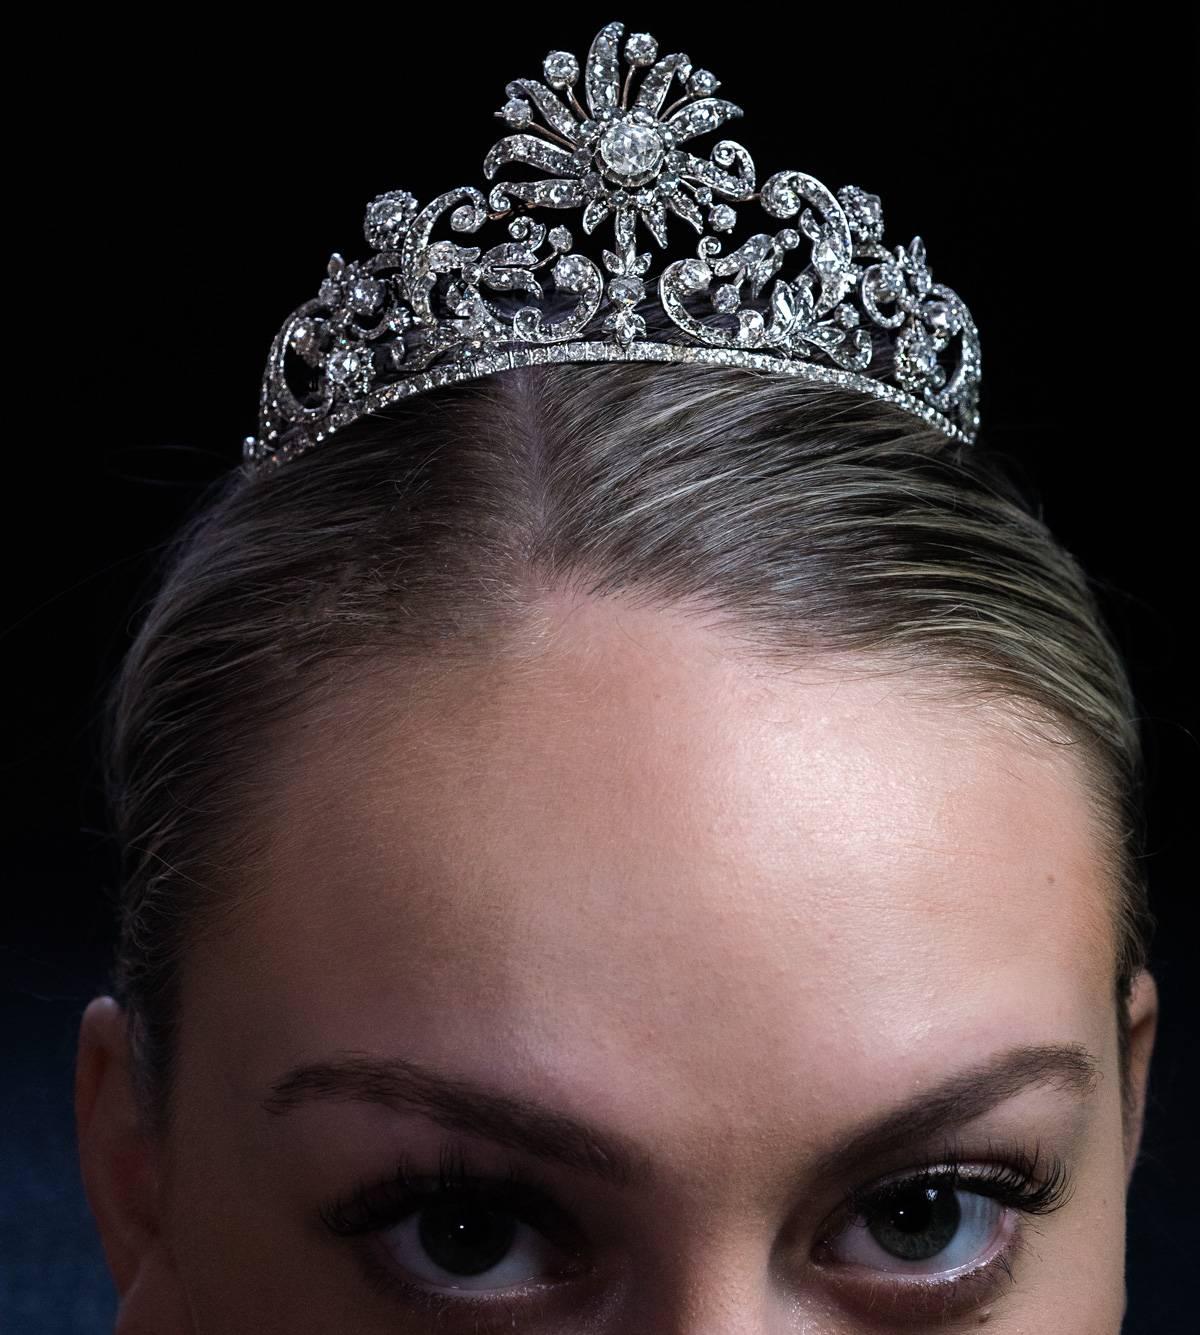 It is one of the very rare early diamond tiaras from the Napoleonic era. We date it to late 1790s - early 1800s. The tiara is crafted in silver-topped gold and is embellished with round and pear shaped old rose cut diamonds.
Length 170 mm (6 2/3